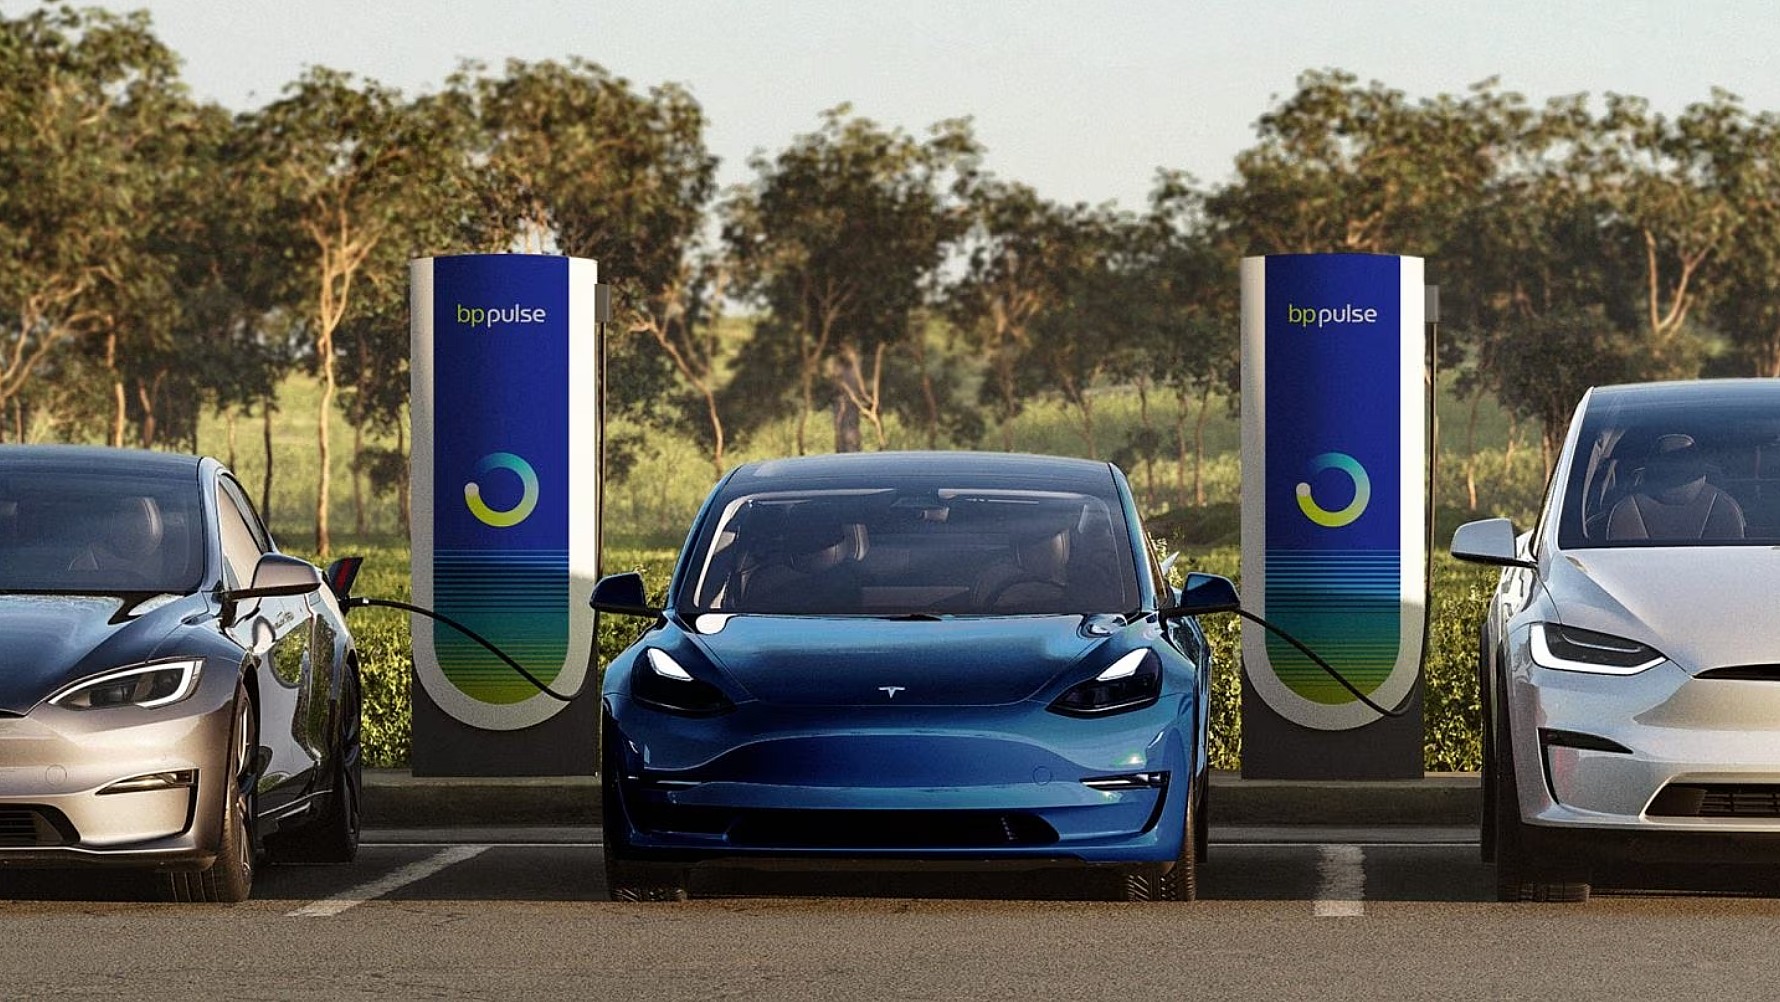 Tesla sells $100M in Superchargers to bp